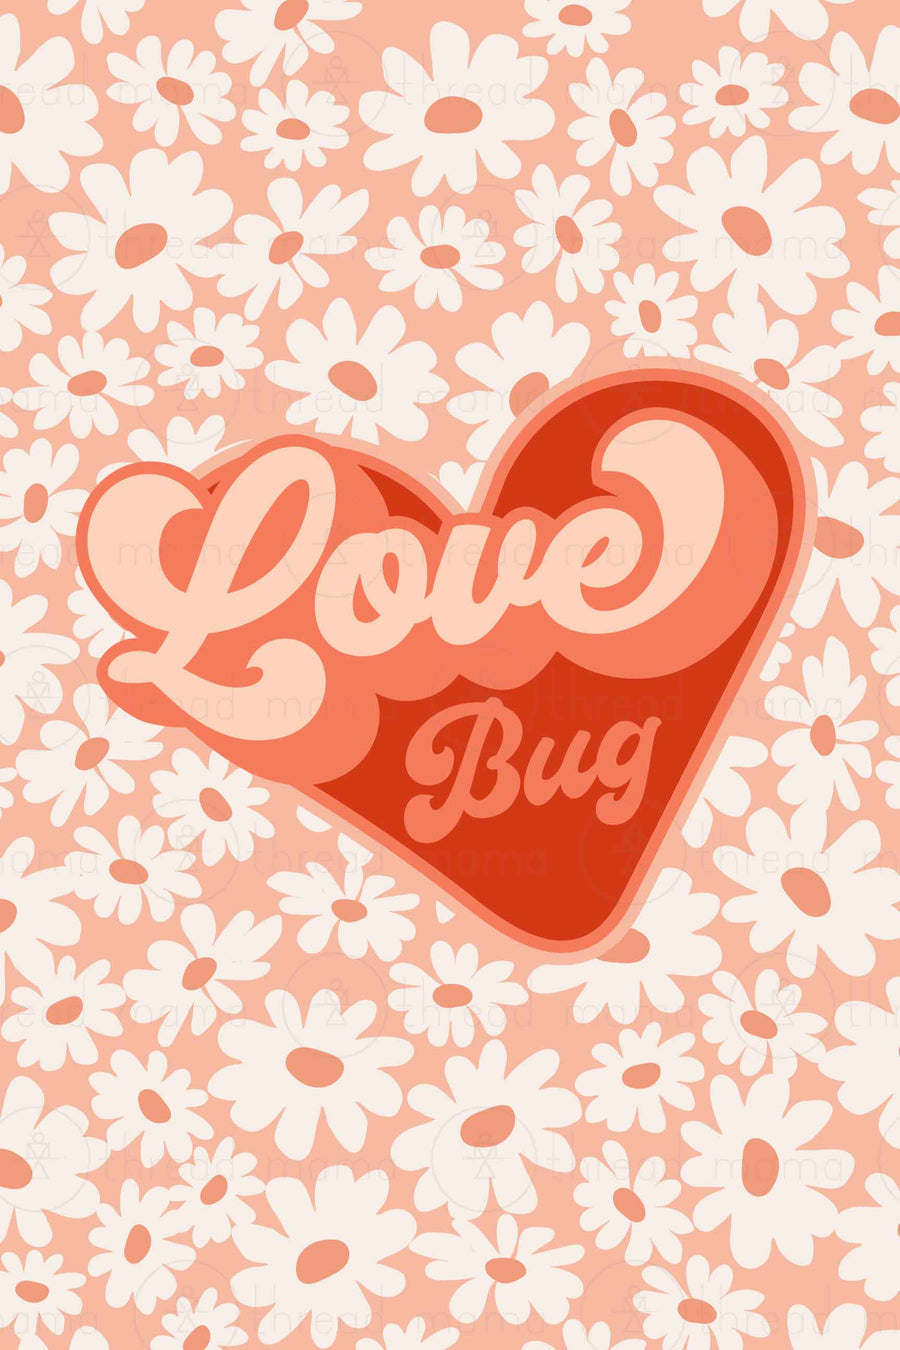 Love Bug (poster collection #1)